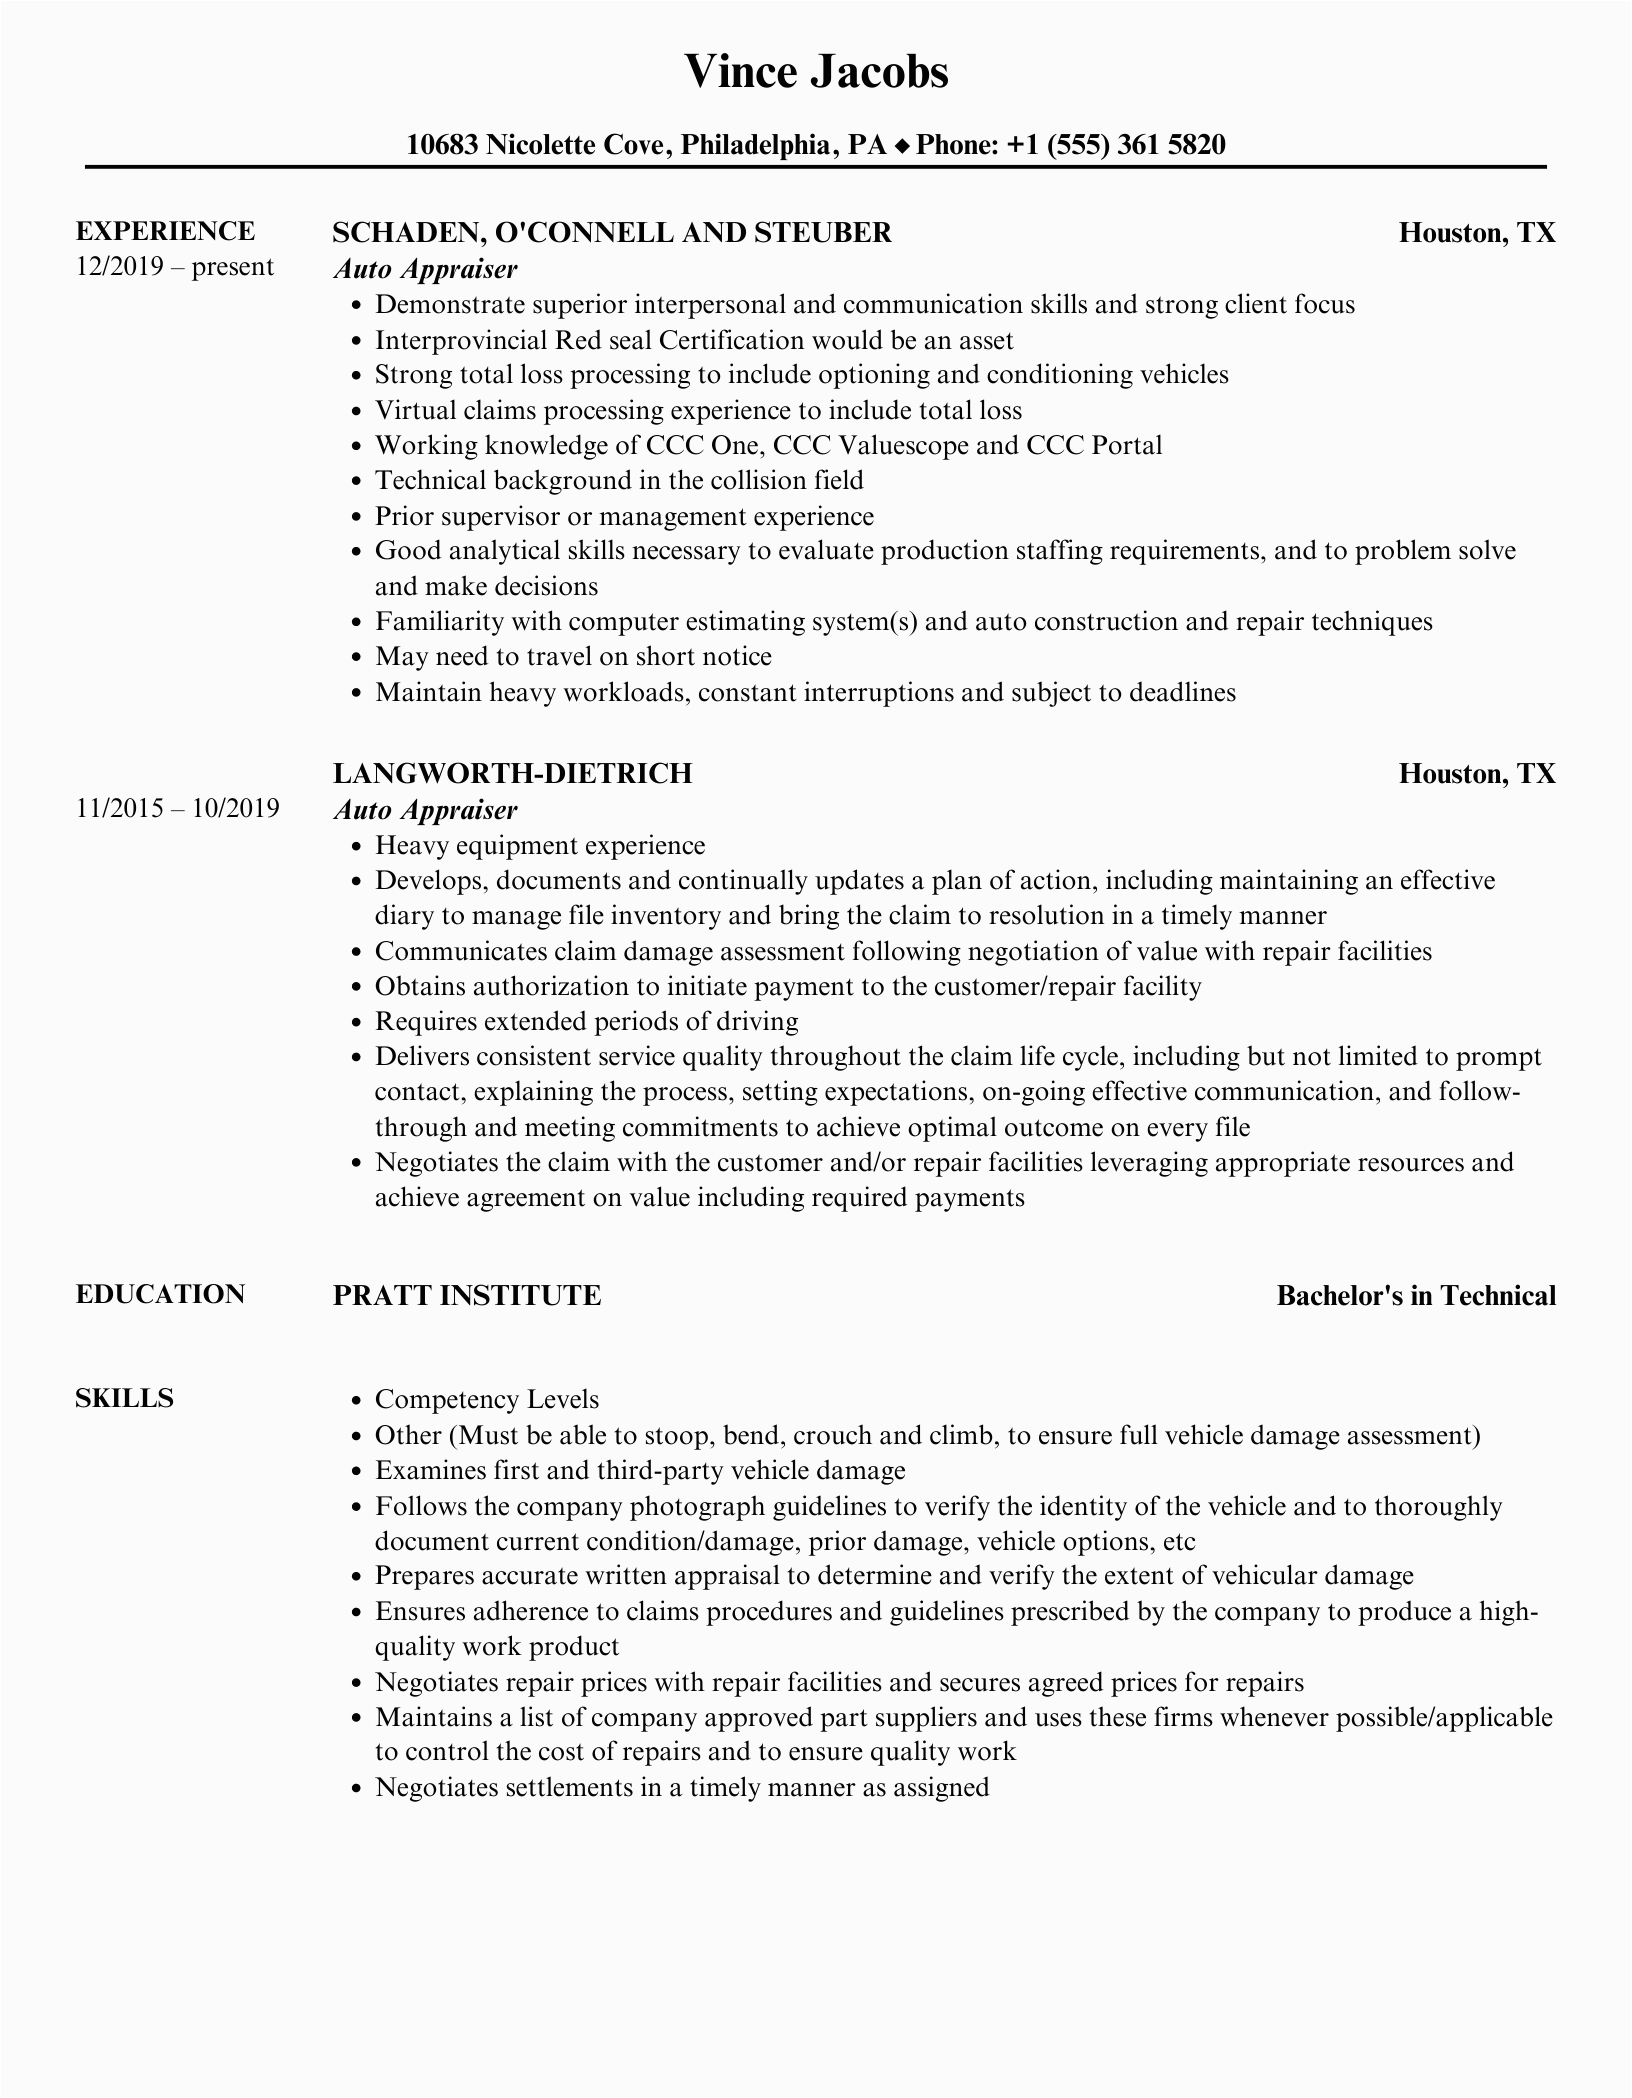 Sample Resume for Auto Claims Auditor Appraiser Estimator Auto Appraiser Resume Samples